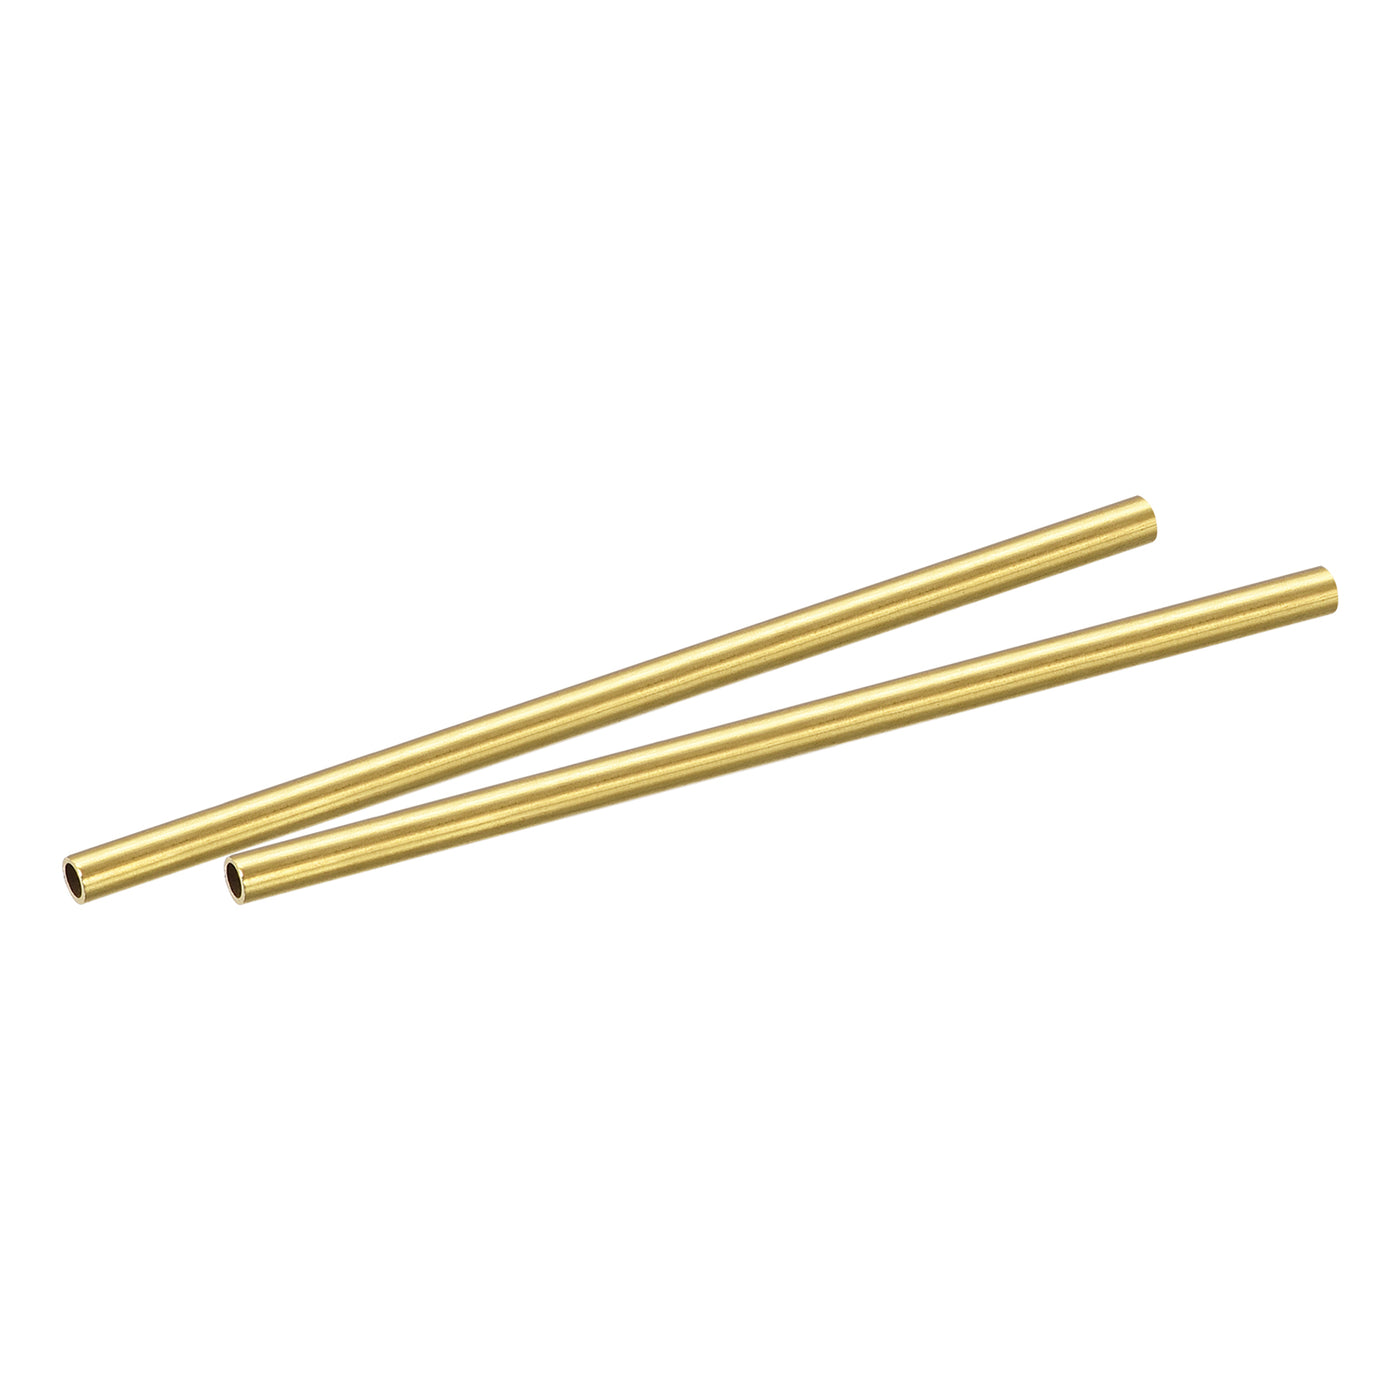 8mm x 1mm x 400mm Seamless Straight Brass Tube for Industry DIY Projects